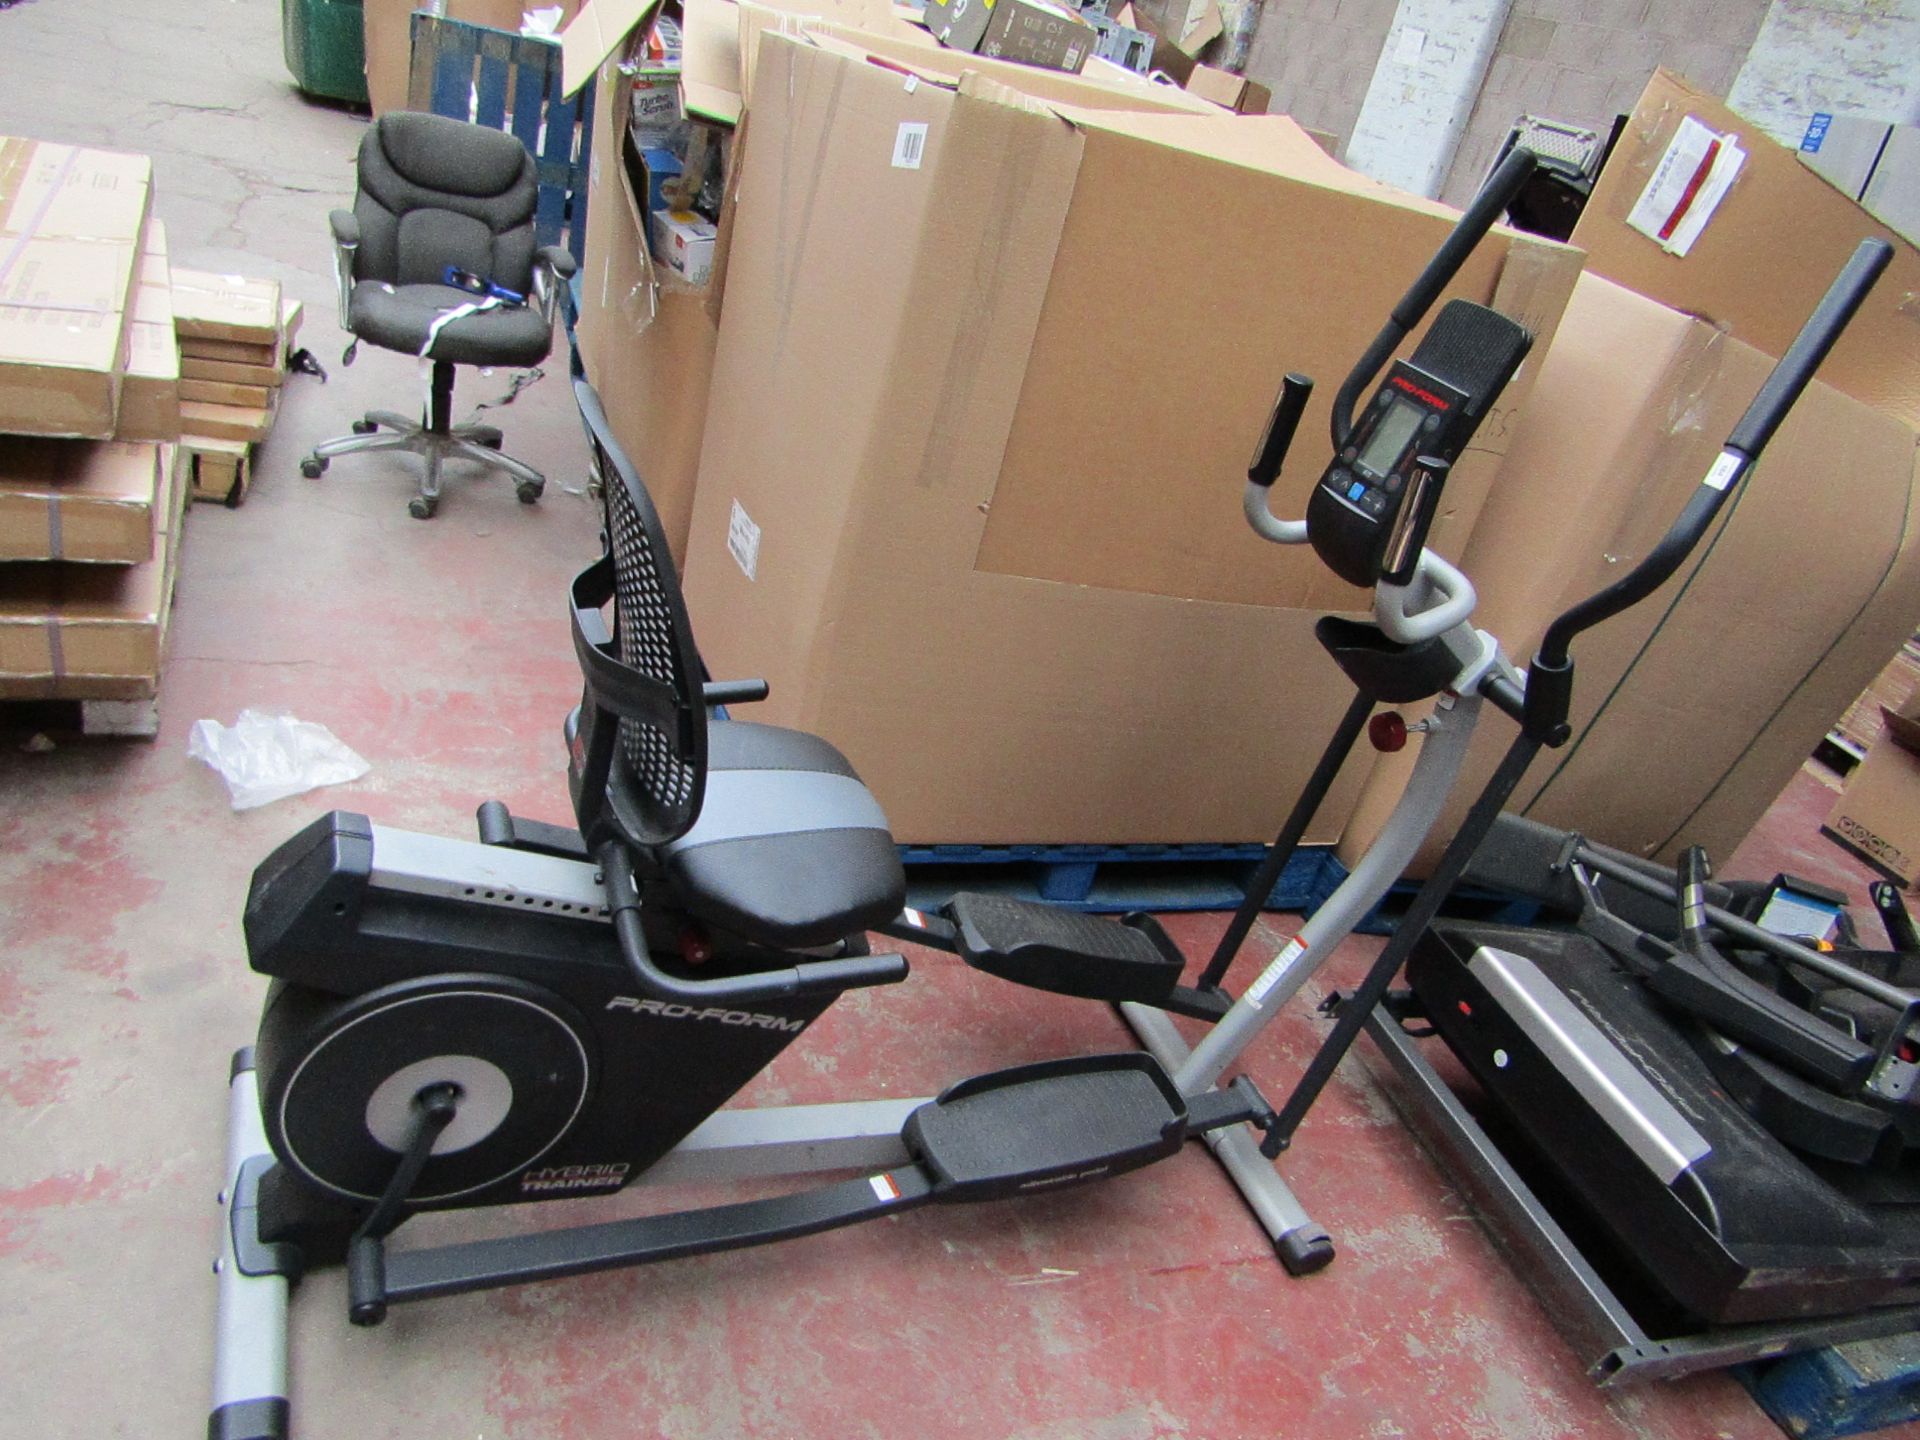 Pro-Form Hybrid Trainer Pro fitness machine, untested. RRP £599.99